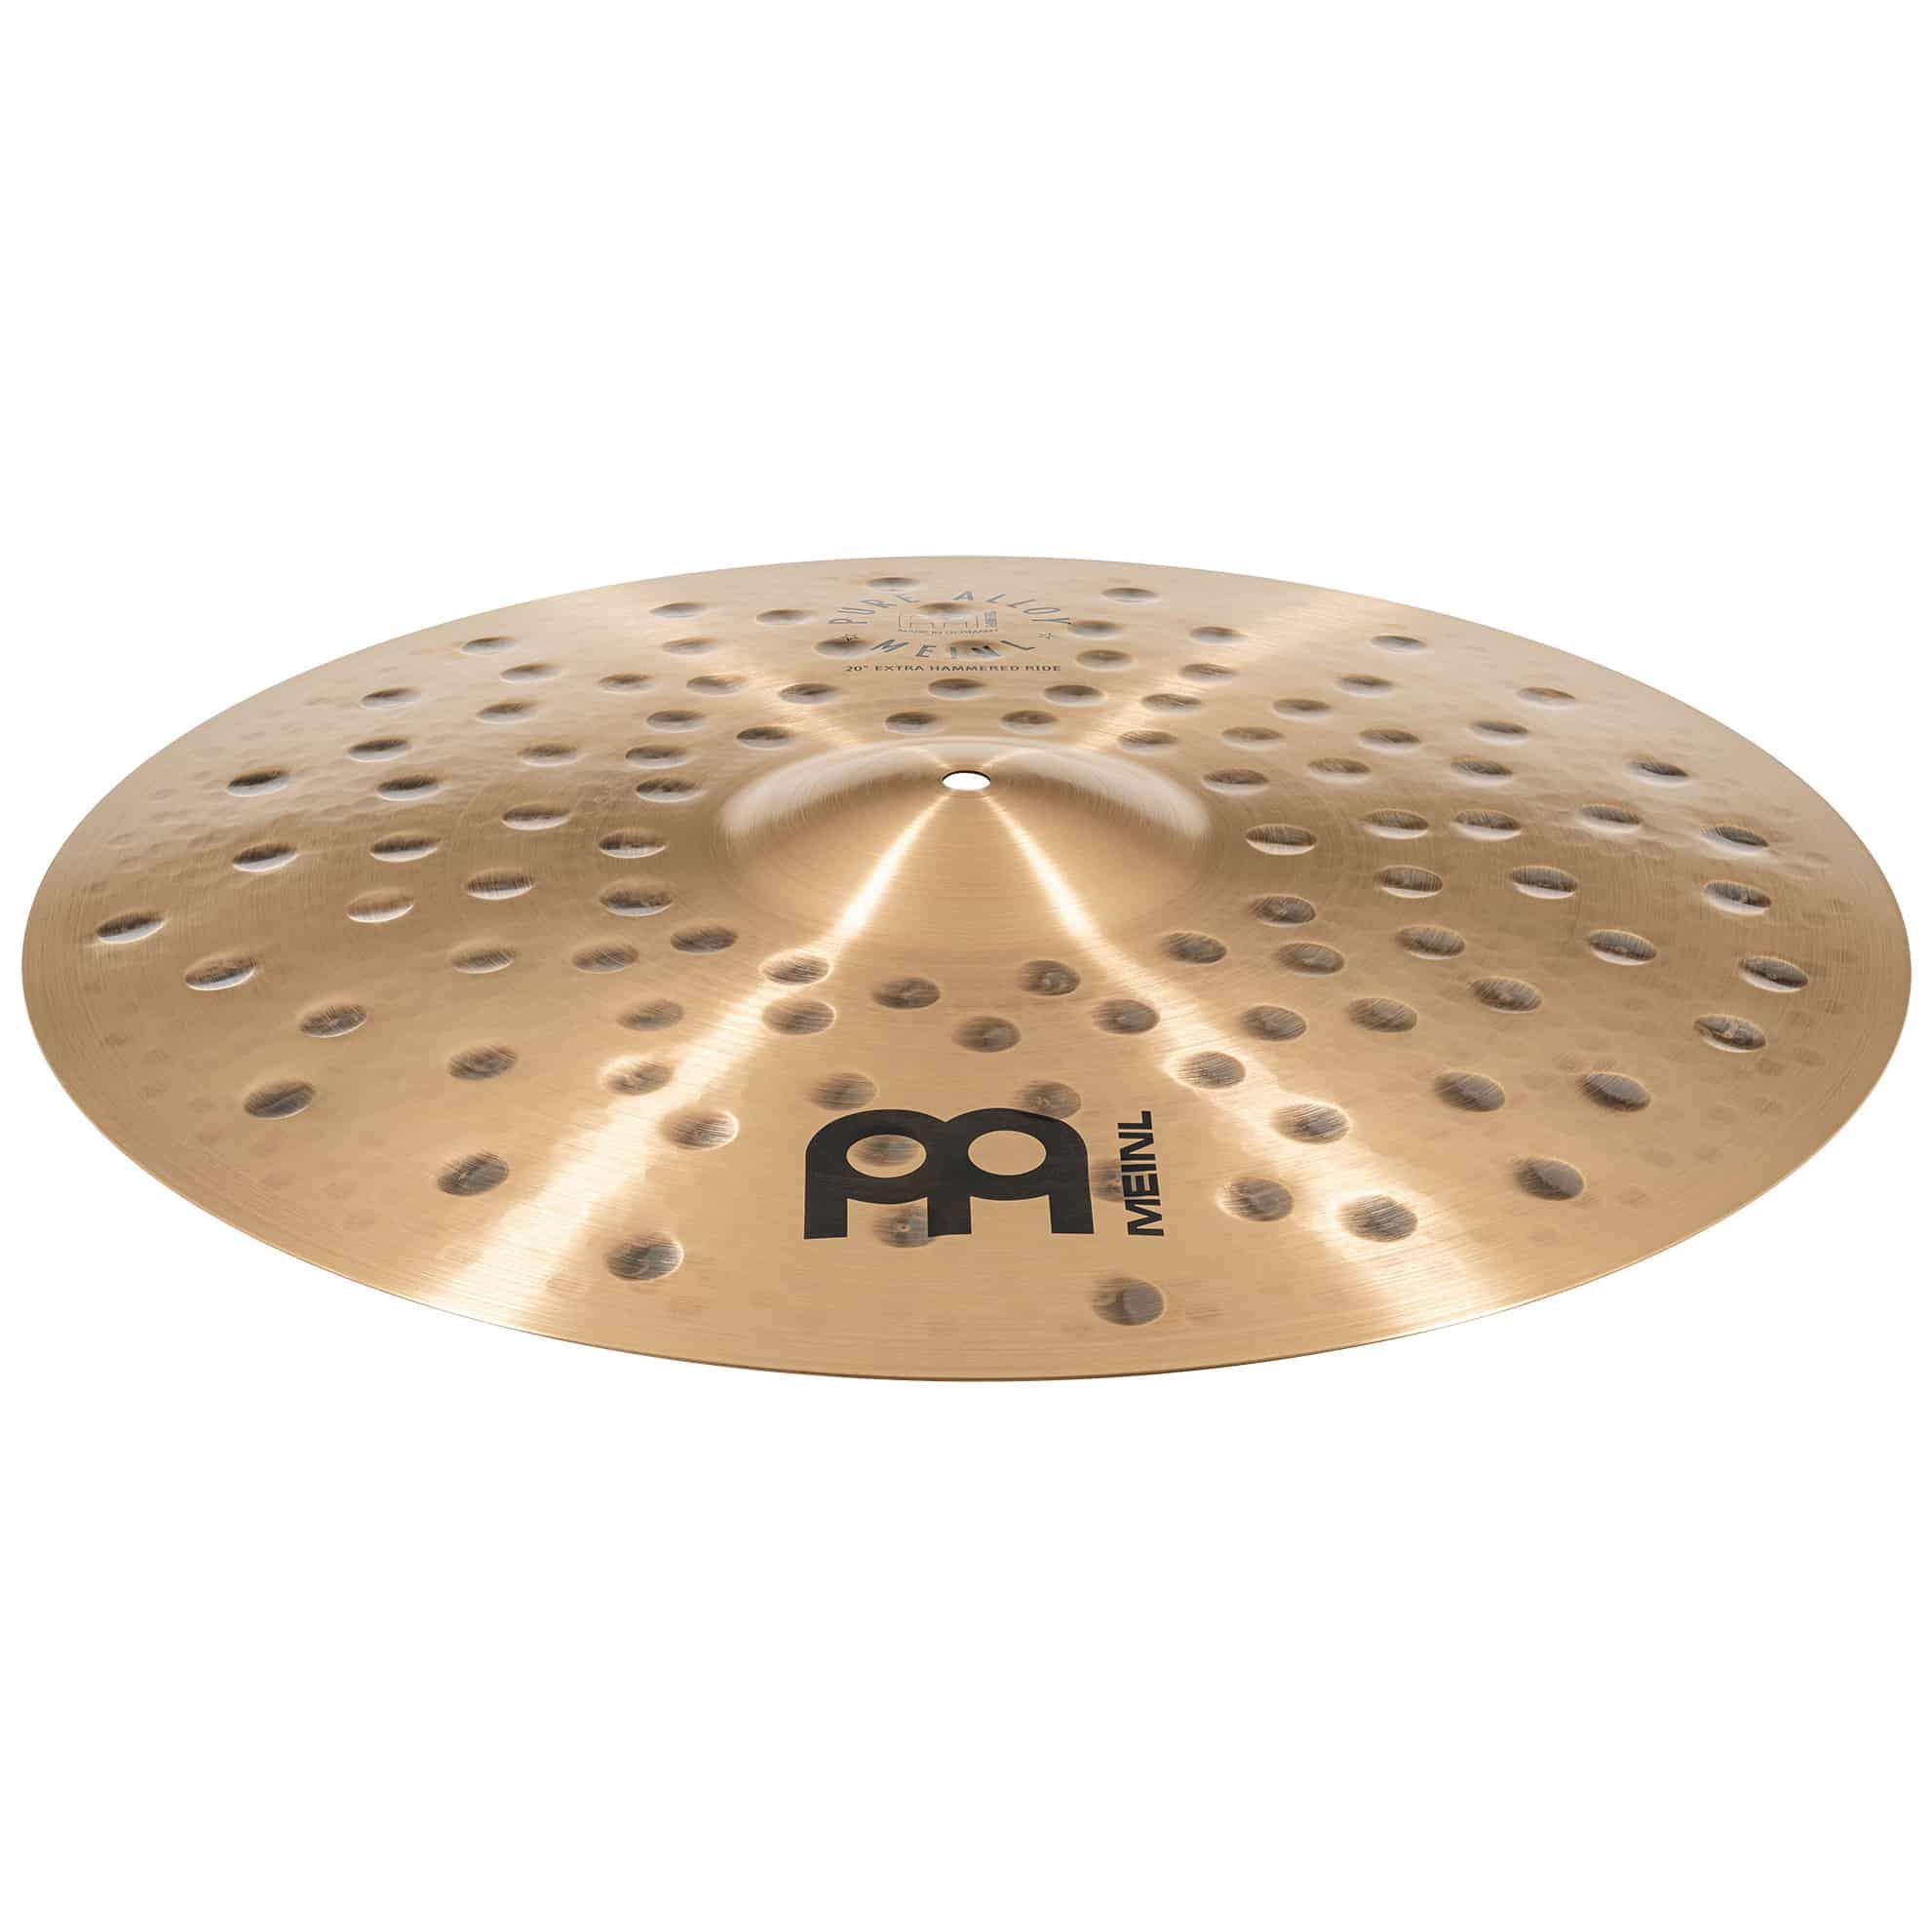 Meinl Cymbals PA20EHR - 20" Pure Alloy Extra Hammered Ride 6